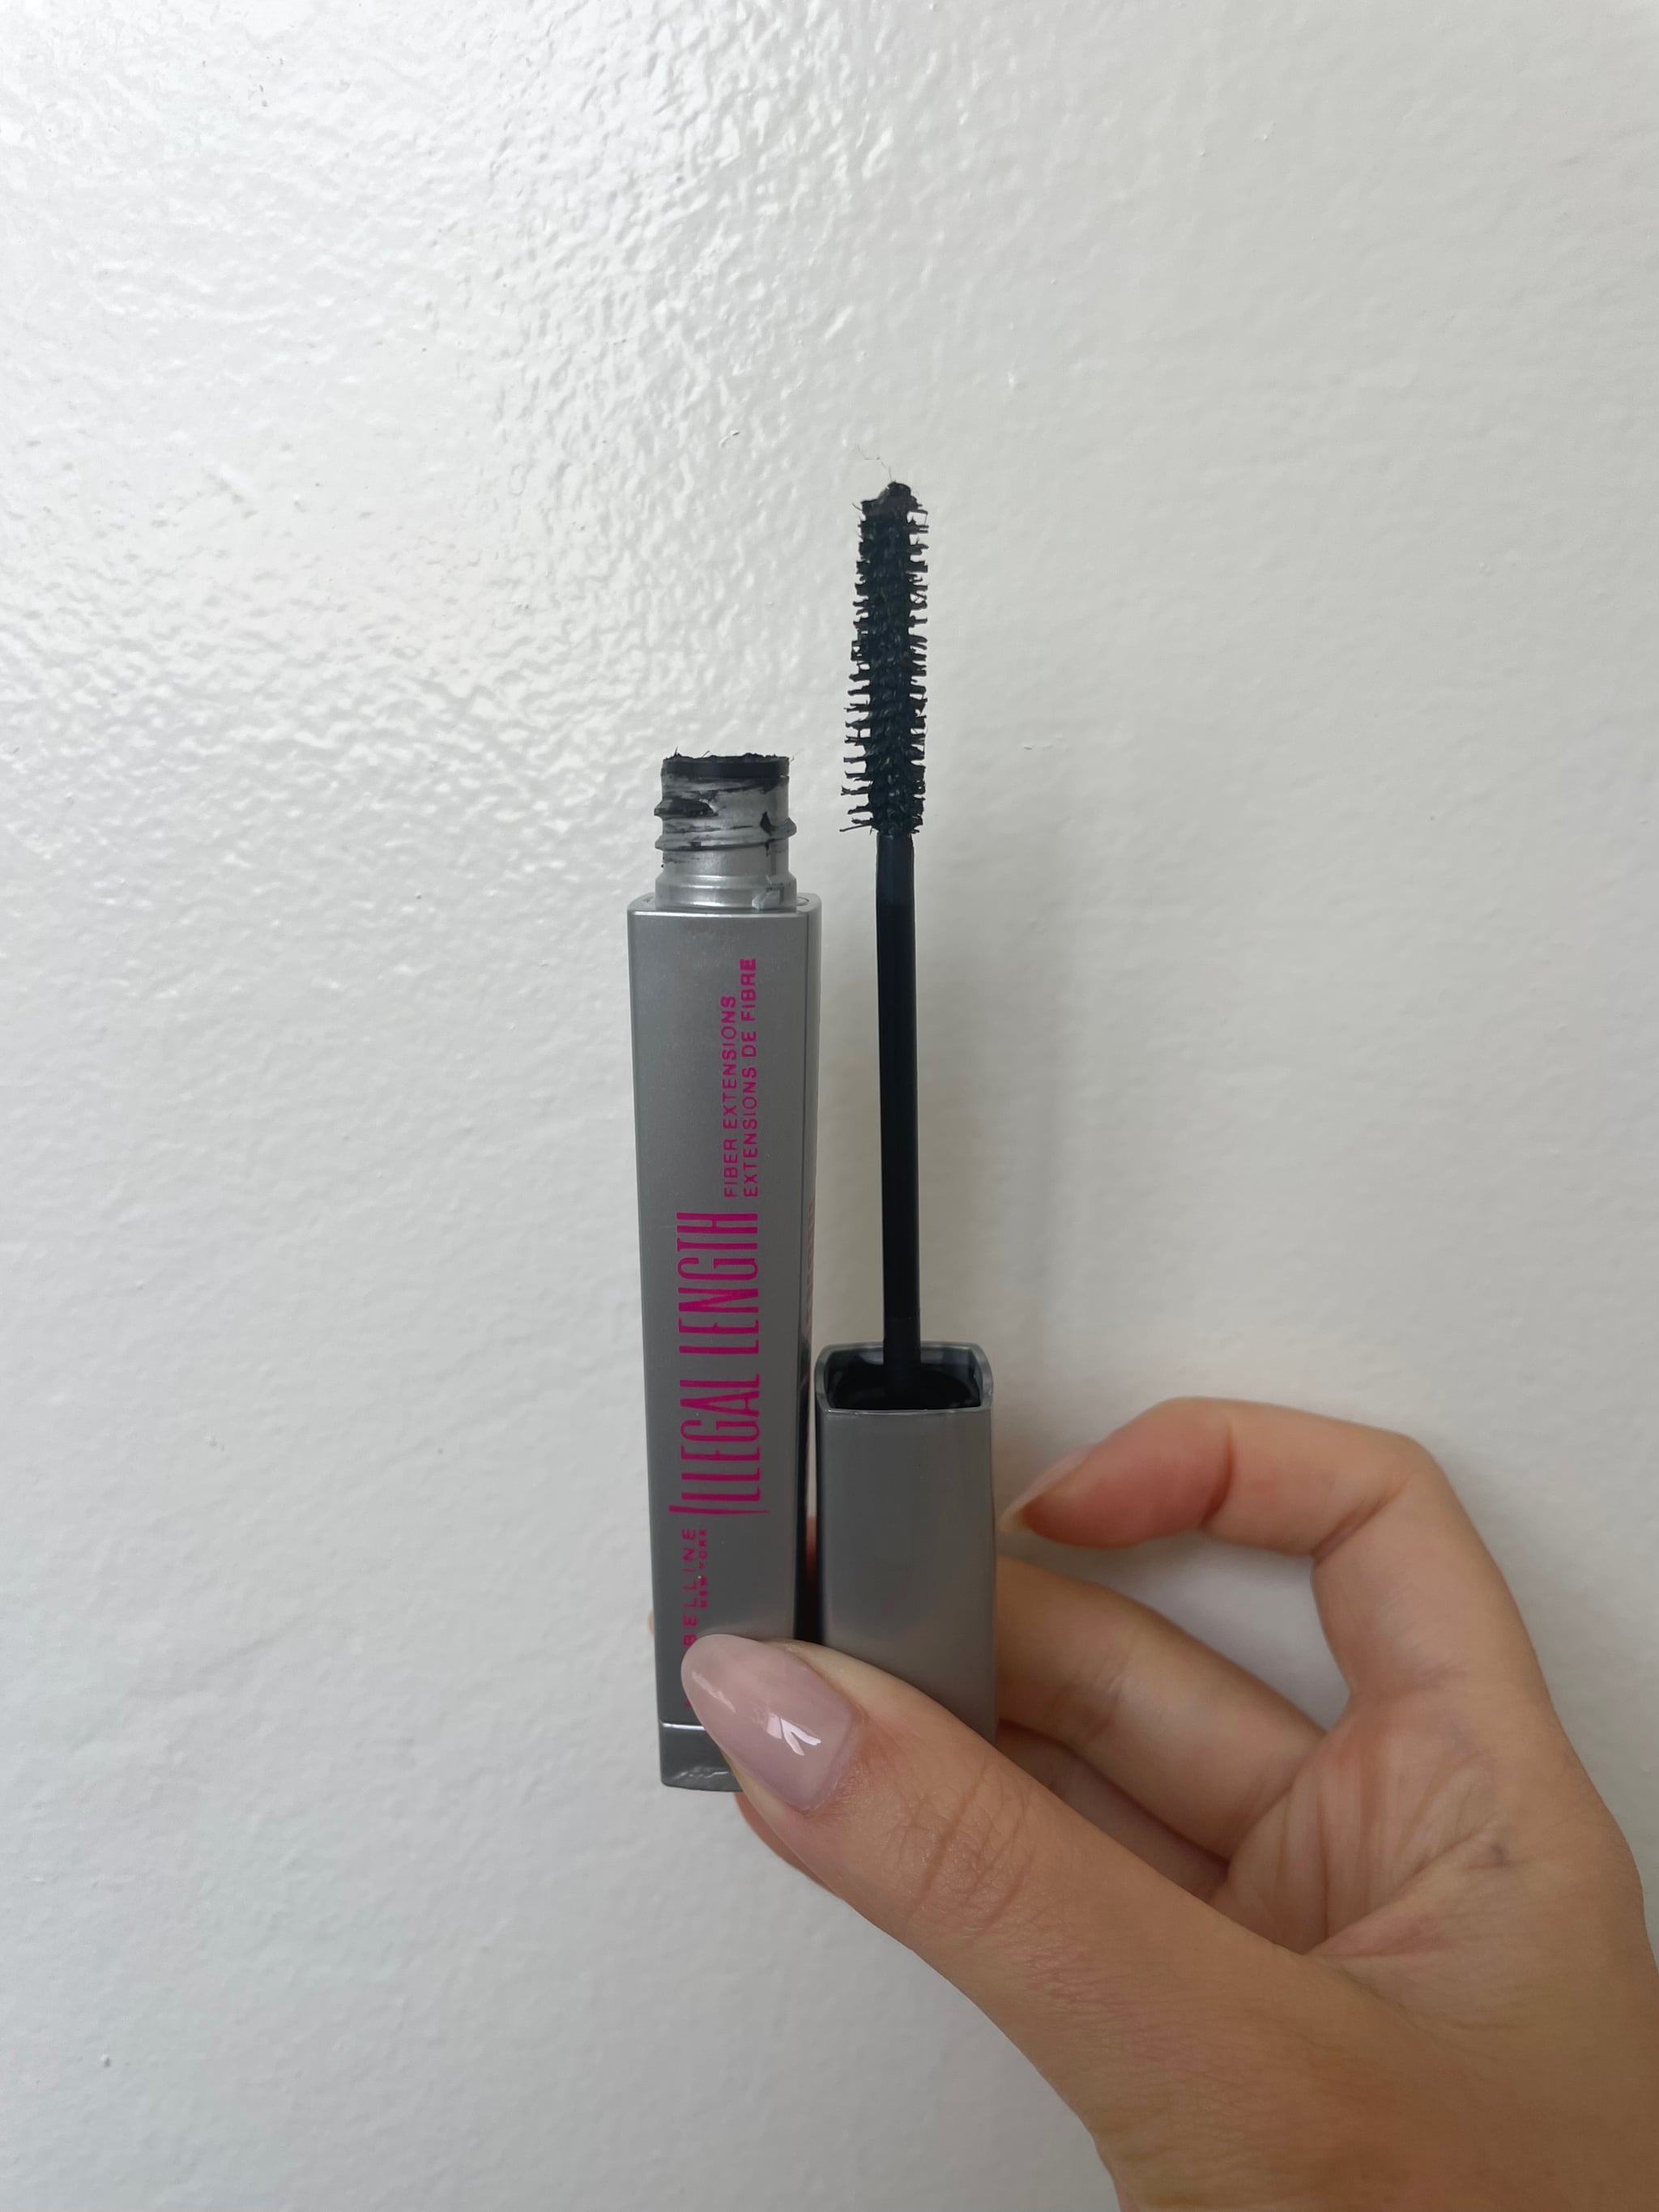 Maybelline Illegal Length Fibre Extensions Mascara